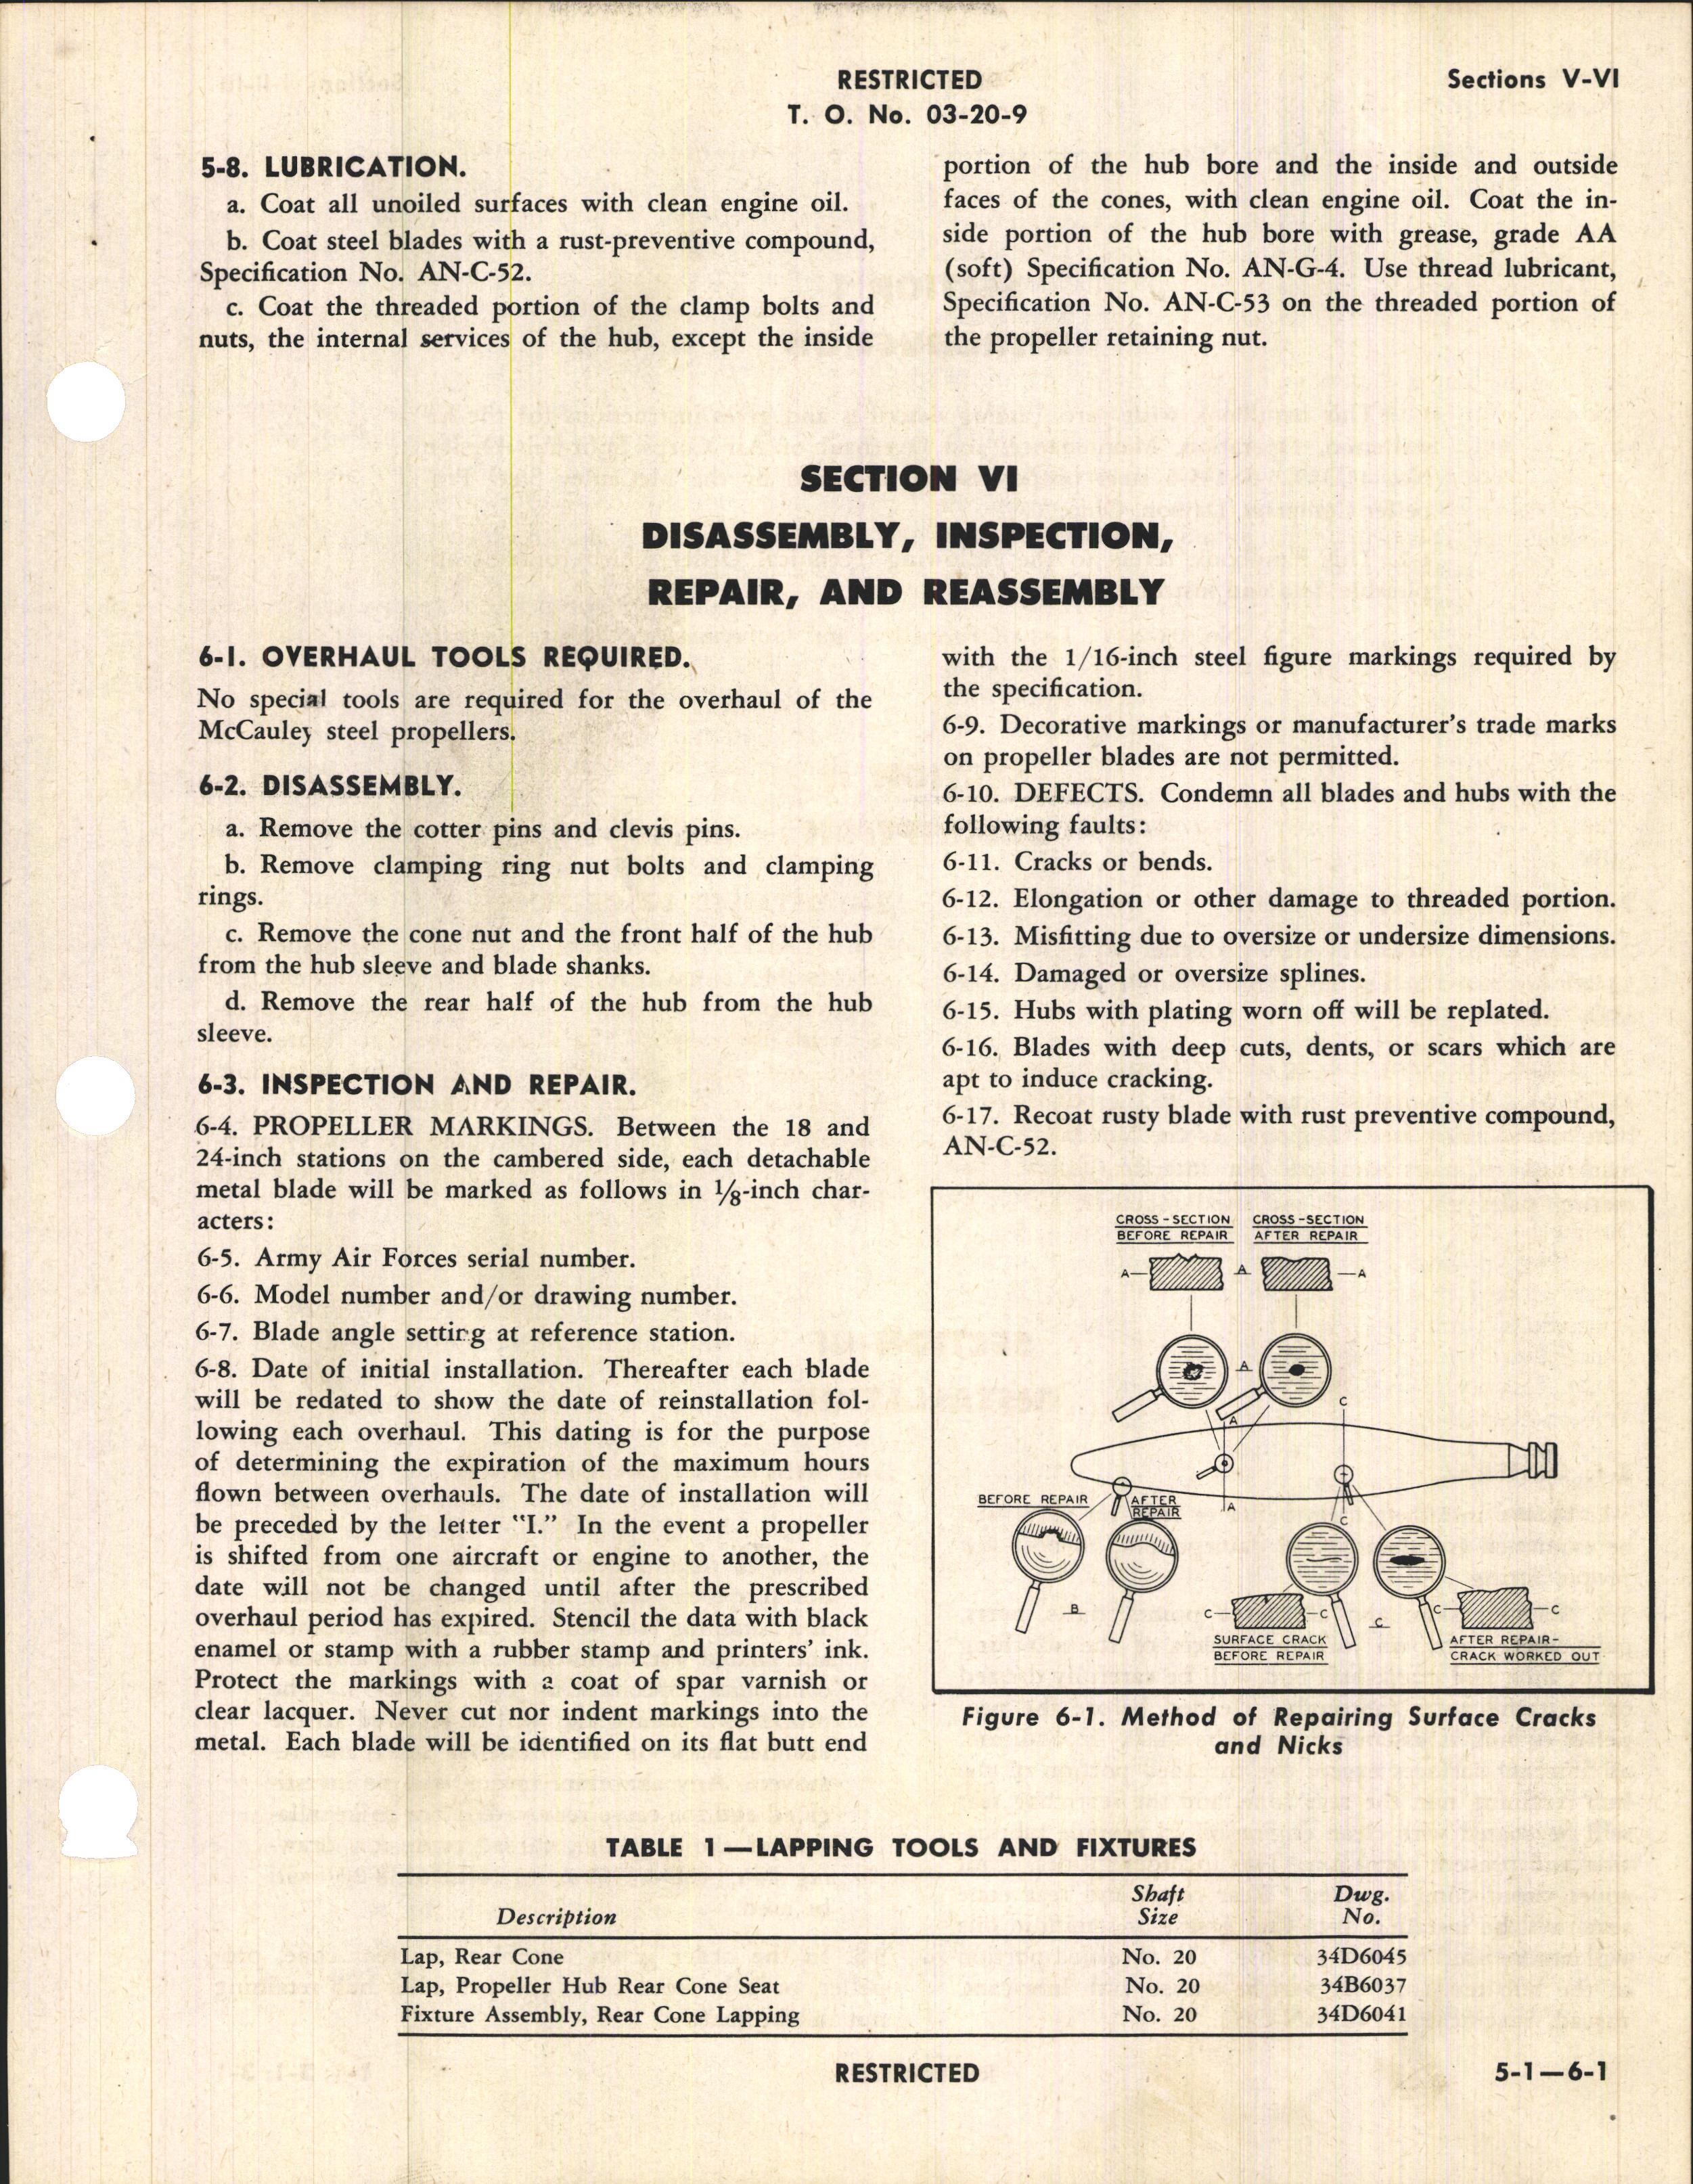 Sample page 7 from AirCorps Library document: Operation, Serivce, & Overhaul Instructions with Parts Catalog for Steel Propellers